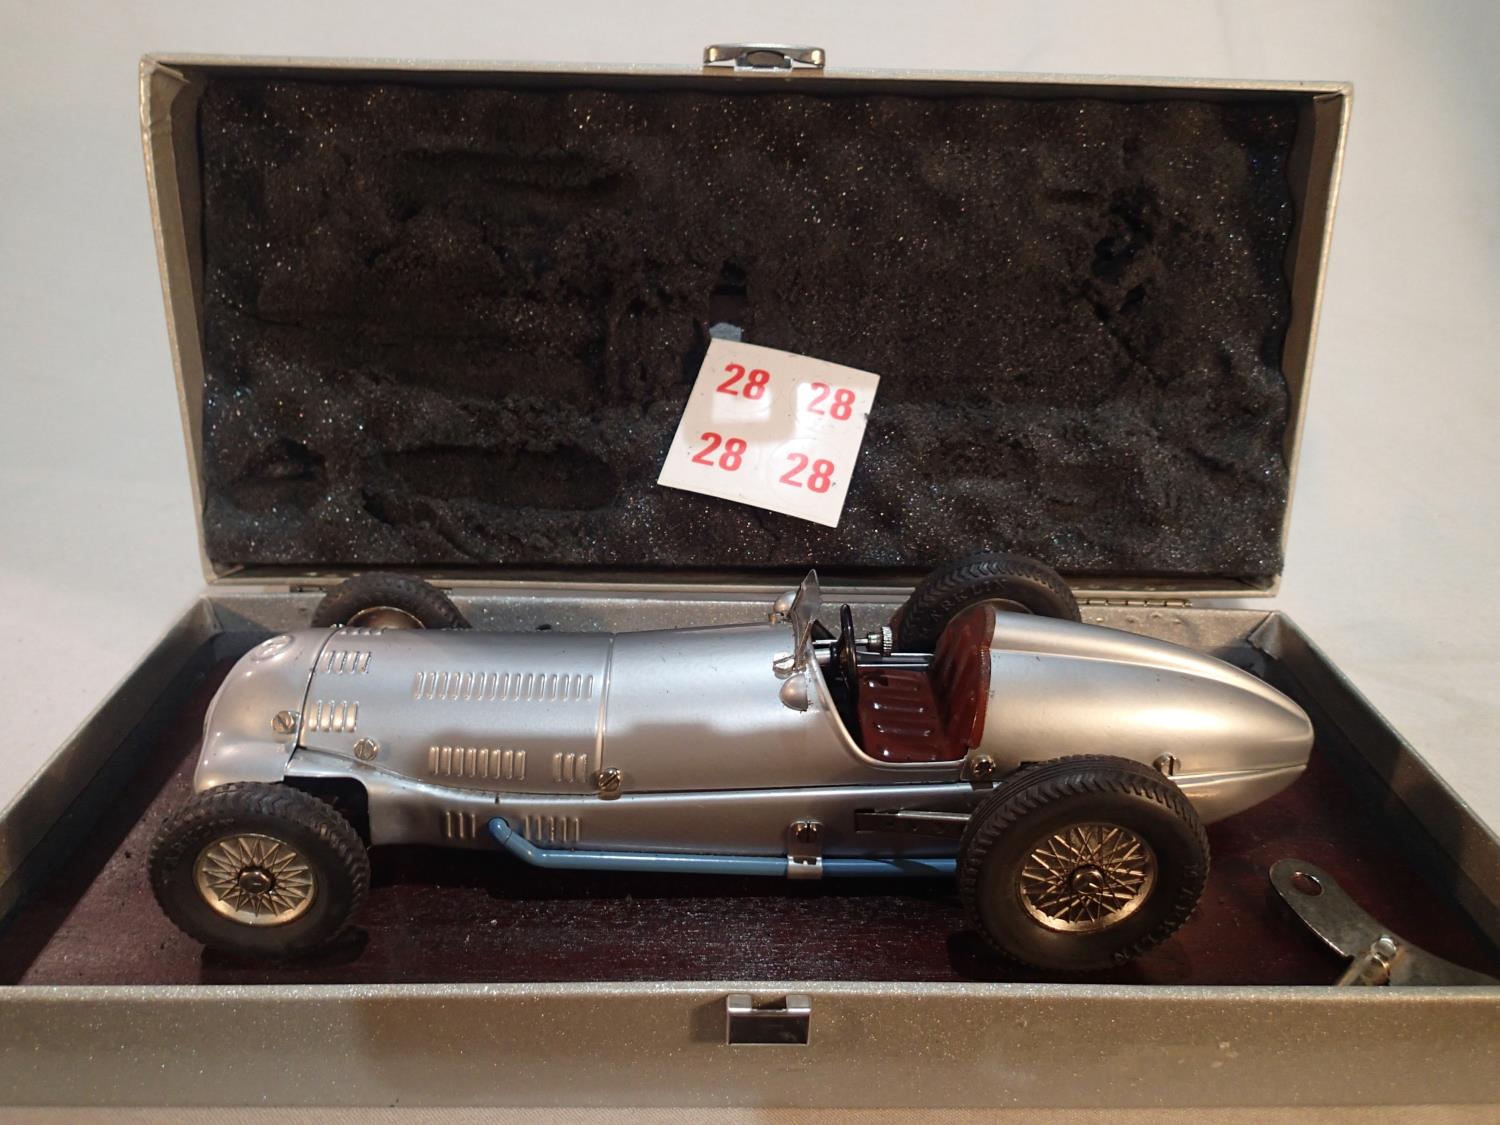 Marklin tinplate clock work W154 racing car, silver, 28 cm, excellent condition, with No. 28